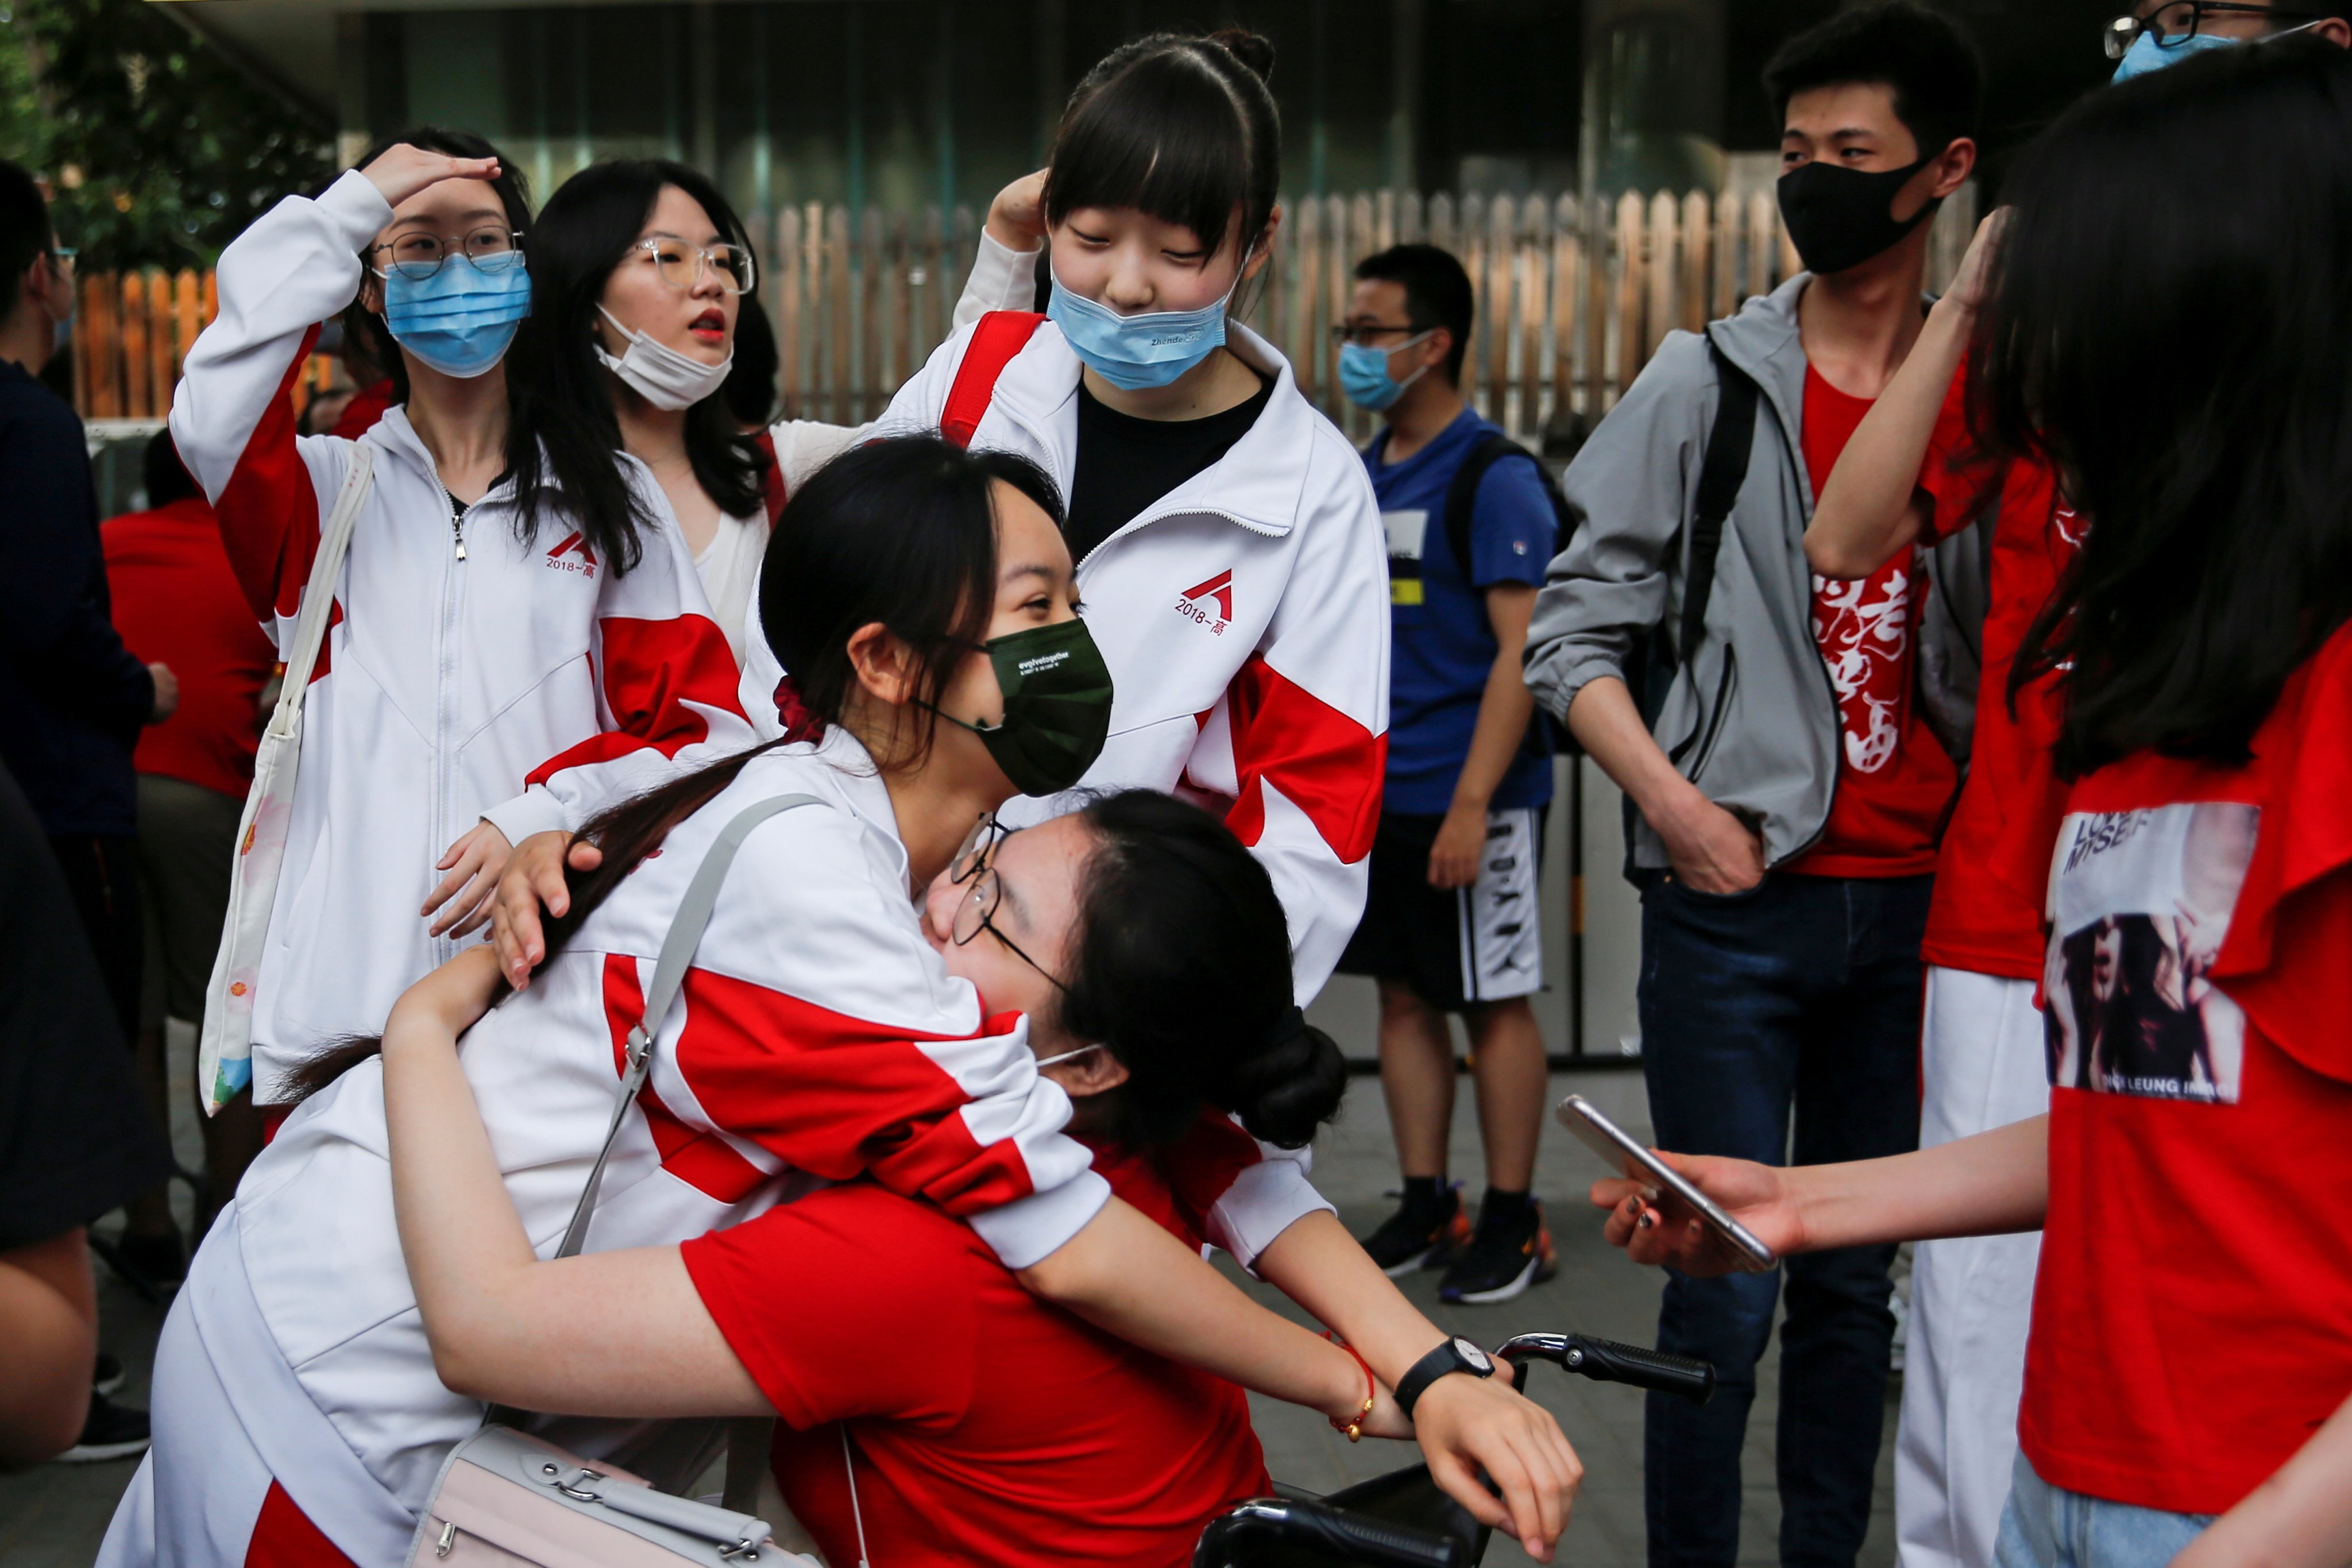 A student hugs her friend before the gaokao, the annual national university admissions exam, in Beijing on June 7. In China, inclusive institutions allow ordinary Chinese to believe that they can earn a good living and move up the social ladder if they study and work hard. Photo: Reuters 